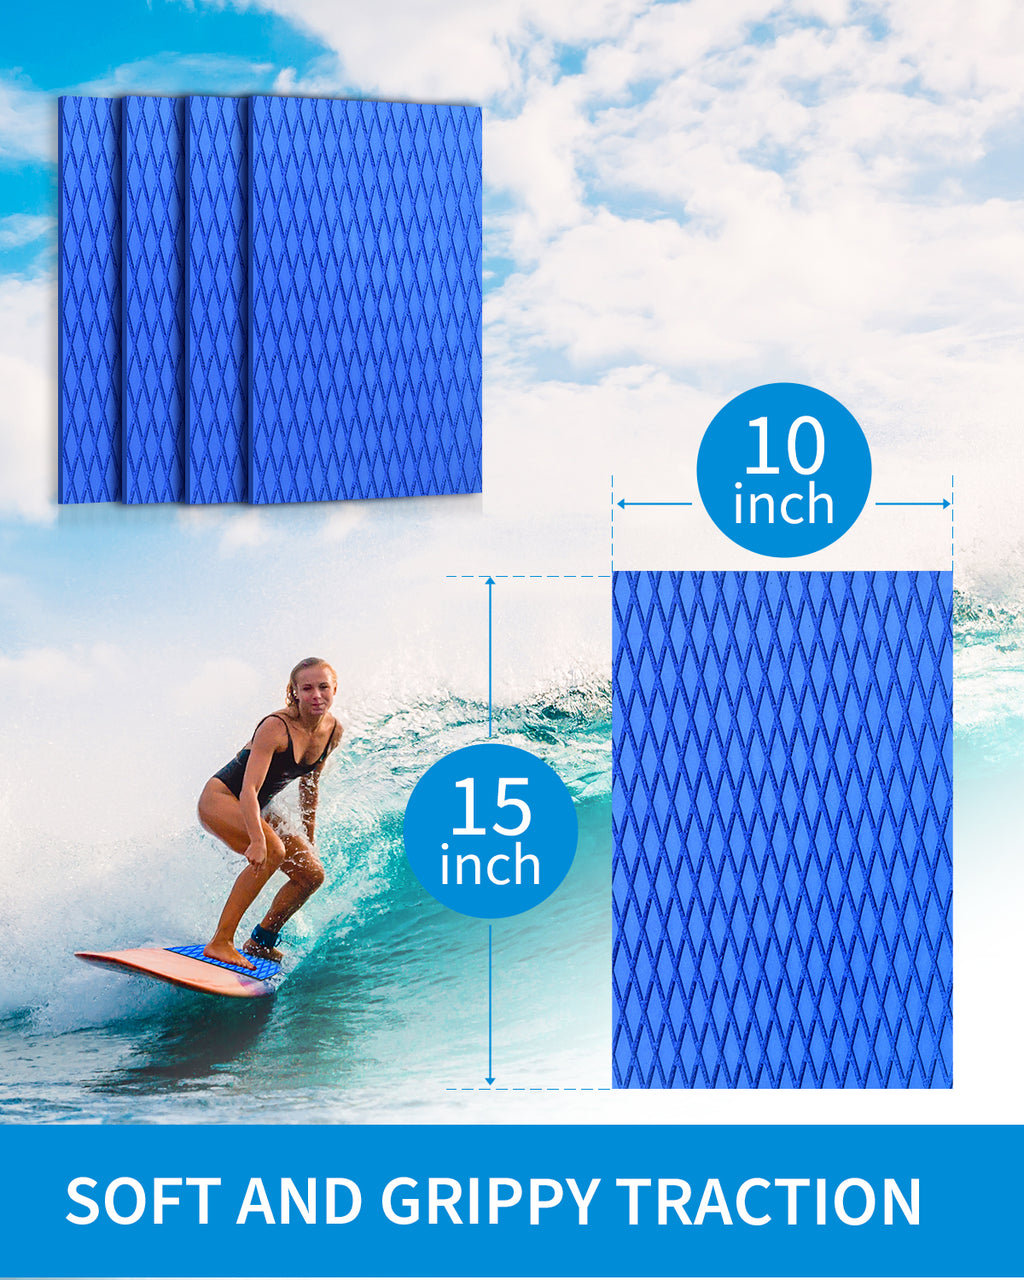 OCEANBROAD 4 Pieces x (15in x 10in) Non-Slip Deck Pad Grip Mat, Self Adhesive Trimmable EVA Traction Anti-Slip Foam Pad Sheet for Boat Kayak Canoe Yacht Pool Step SUP Board, Blue